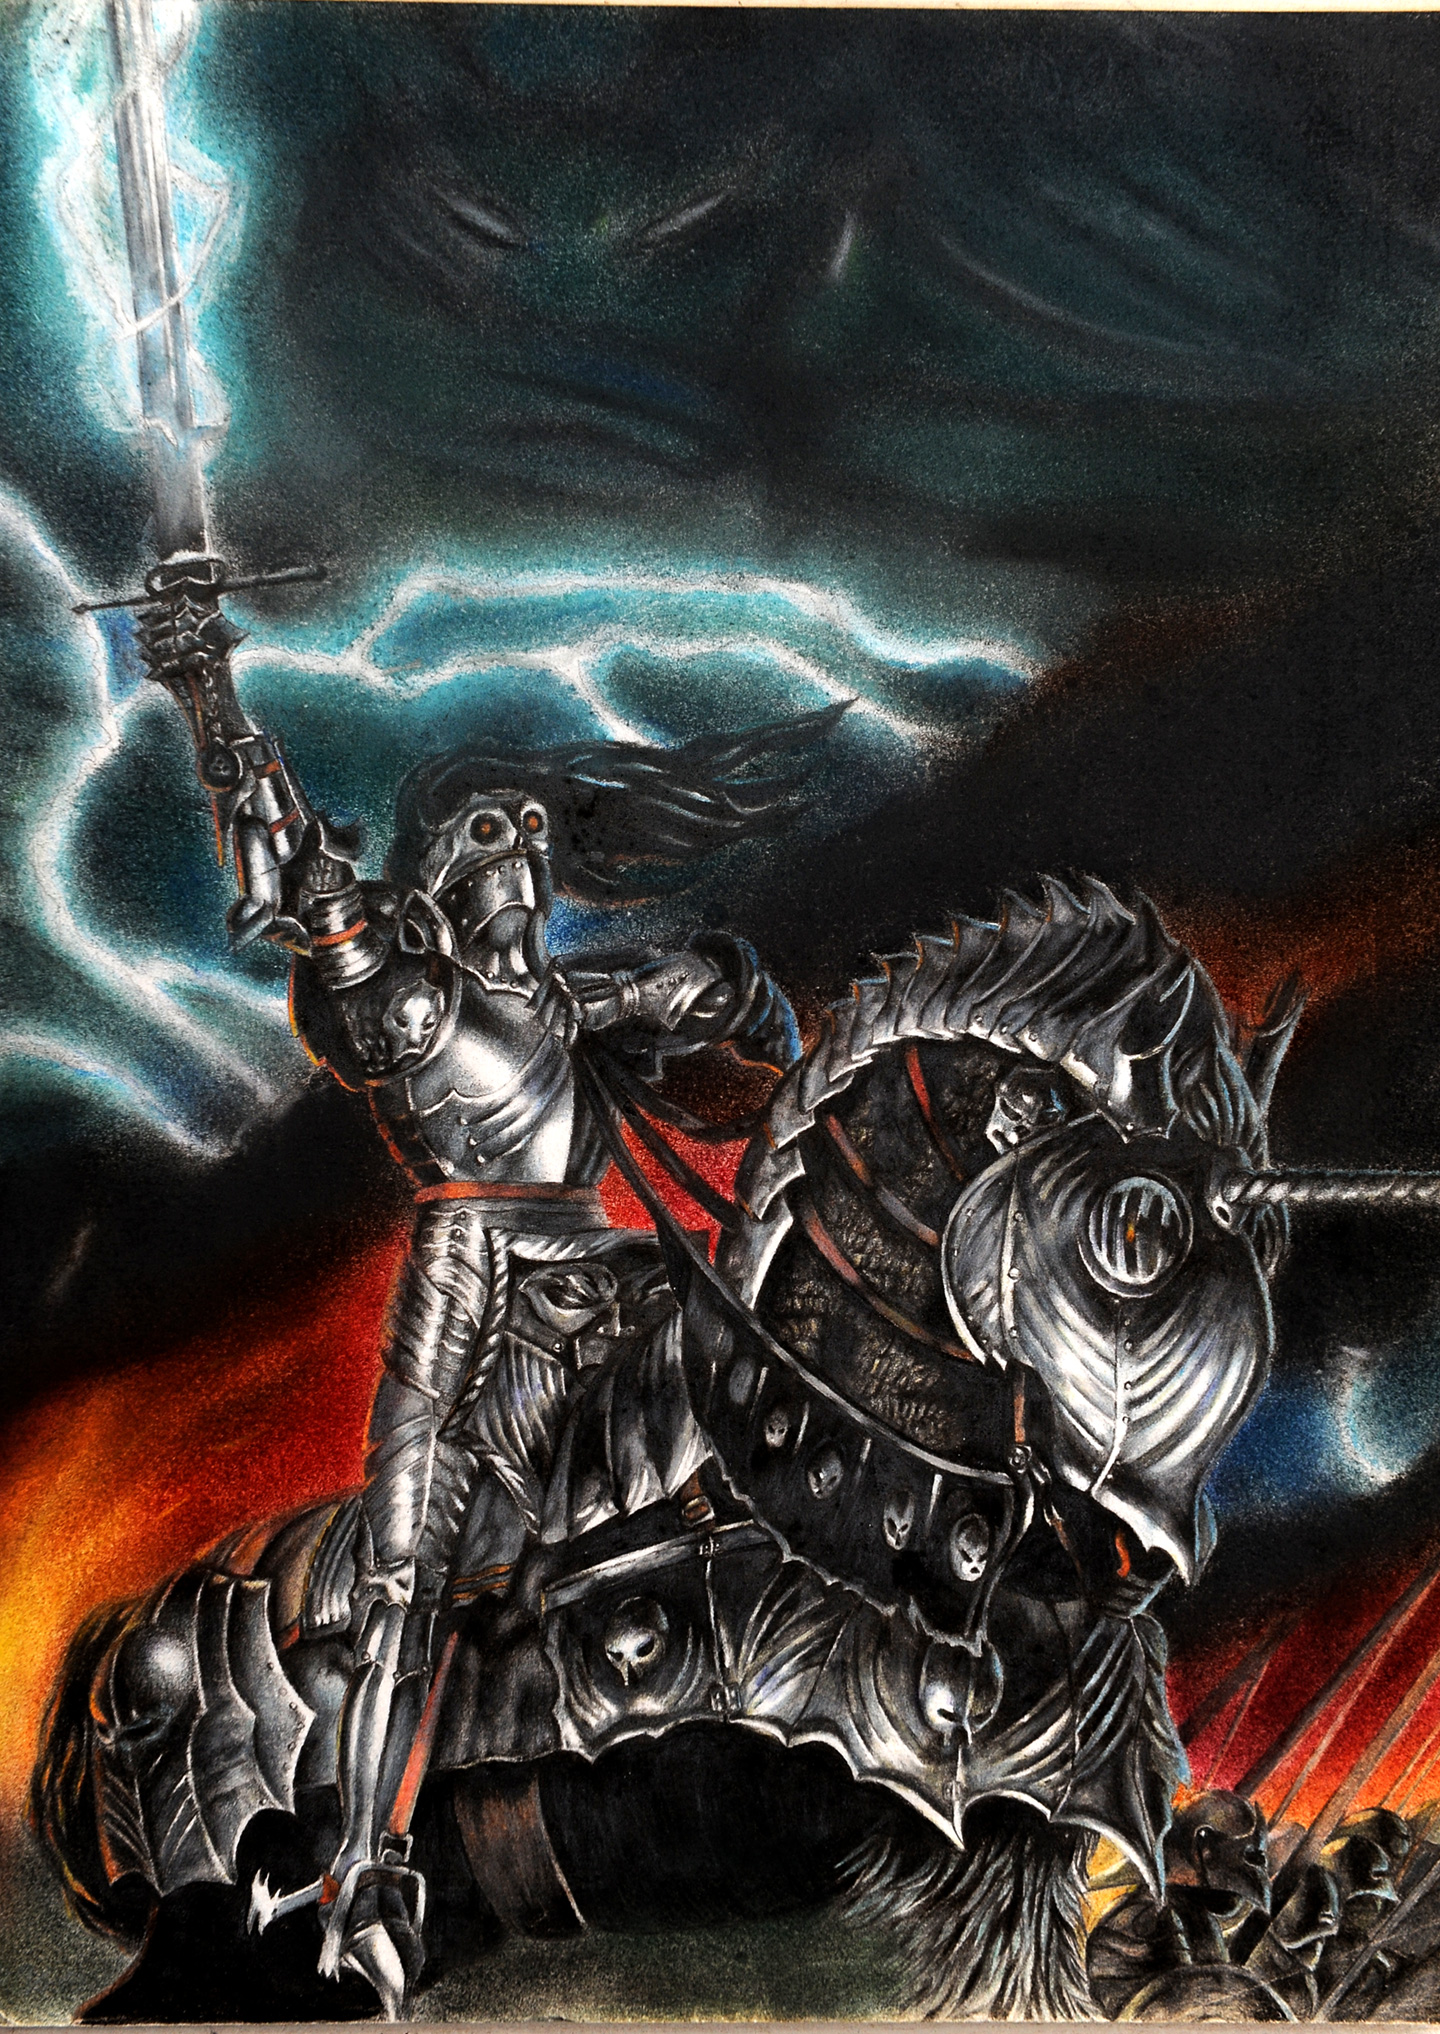 A color drawing of a malefic knight on a big horse wearing a magnificent shiny armor and brandishing a magical sword